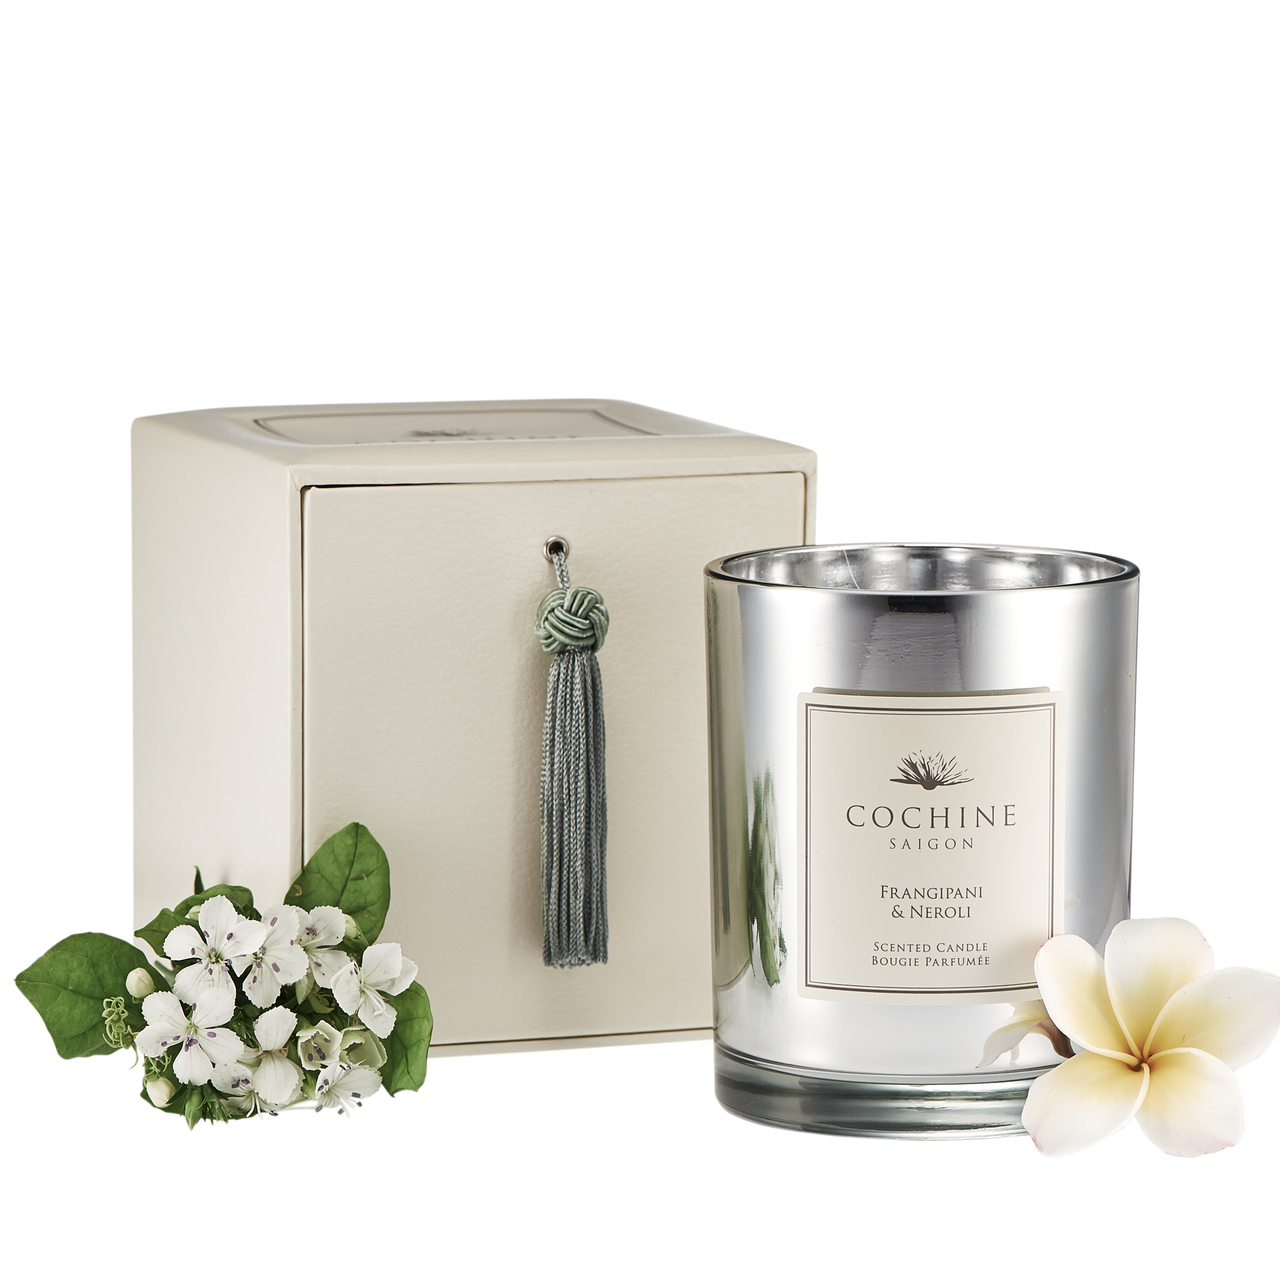 Cochine scented candles are a stylish way to enrich your home with the luxurious ambience of sun-warmed Saigon. Cochine candles are made using the finest essential oils, eco-friendly cotton wicks and the creamiest botanical wax from renewable resources. 